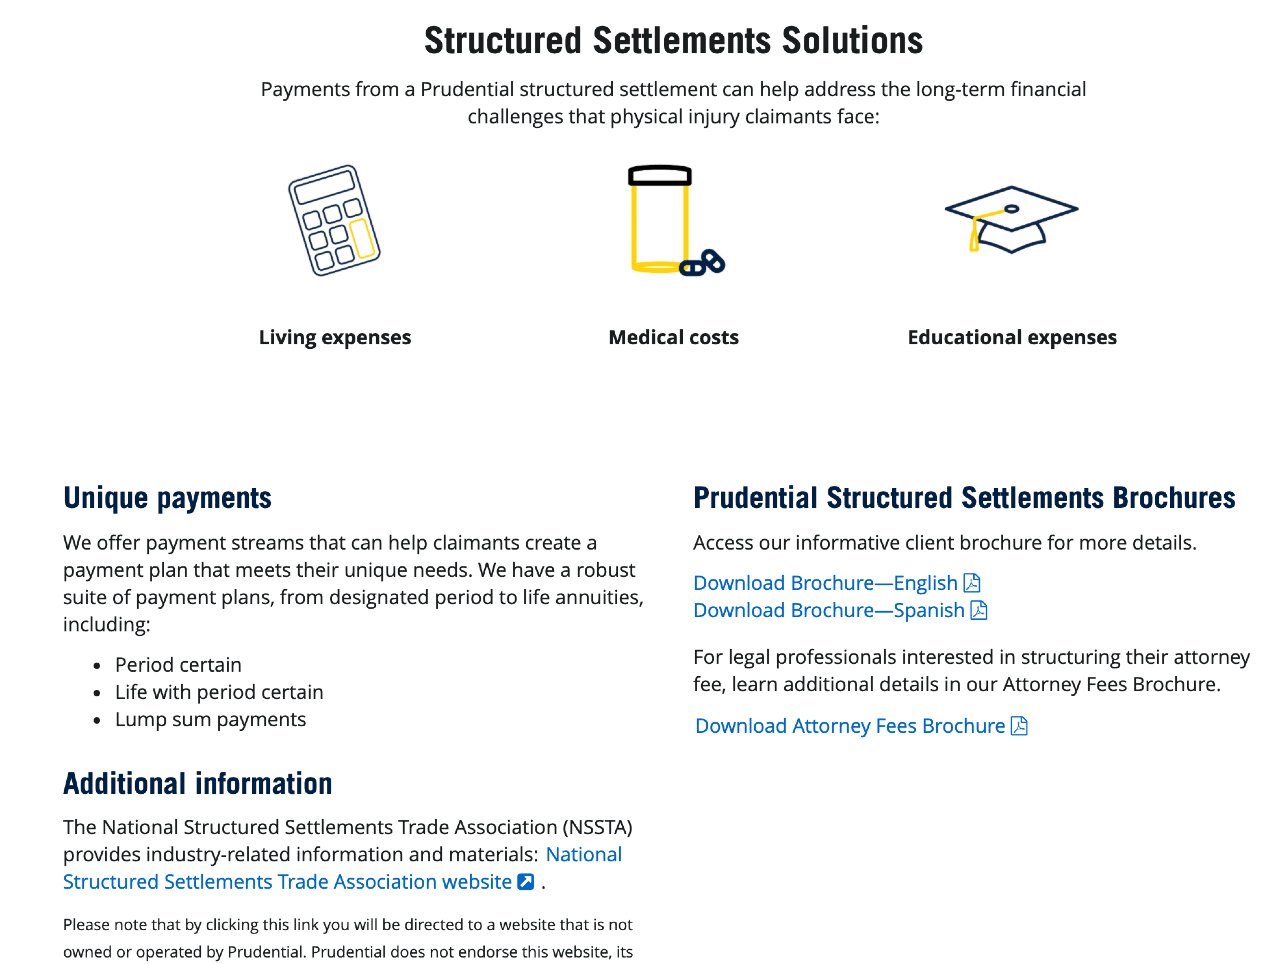 structured settlement company 6, Prudential's Structured Settlement Solutions overview